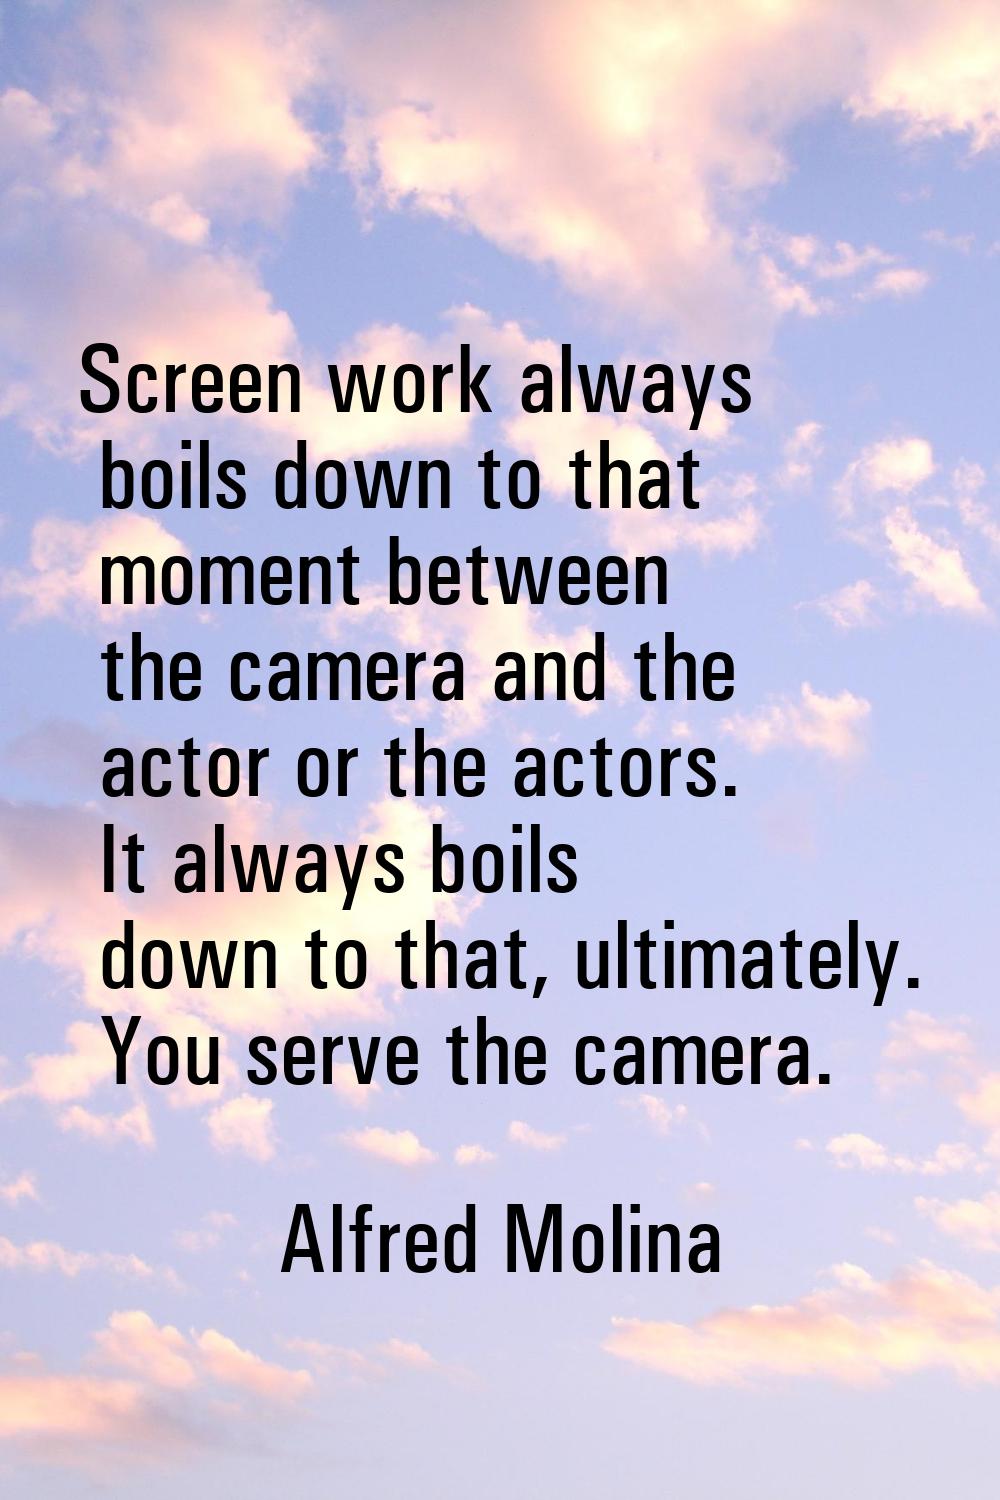 Screen work always boils down to that moment between the camera and the actor or the actors. It alw